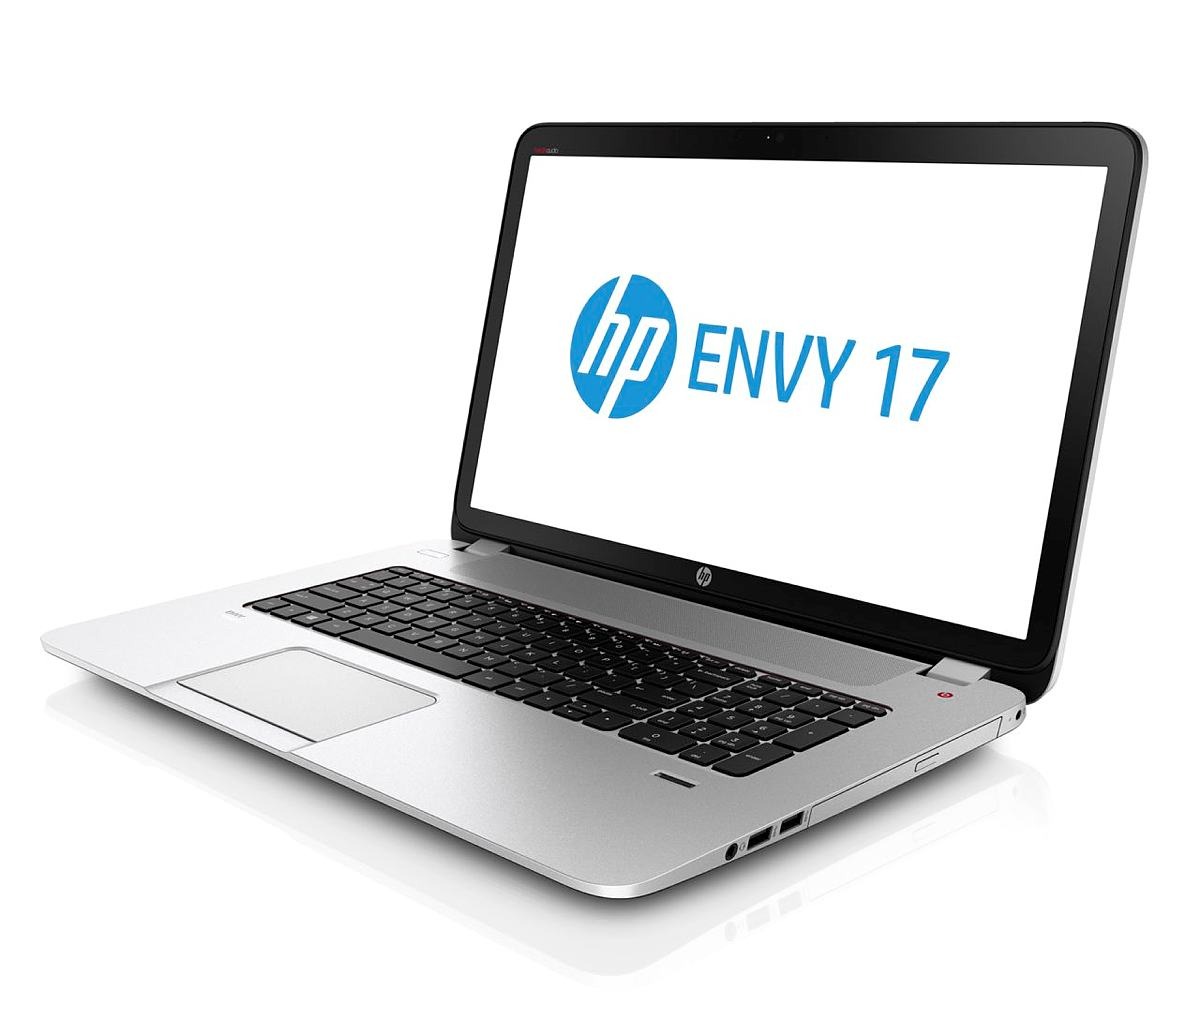 Hp The Envy Has A Inch Display And Full Numeric Keypad Plus